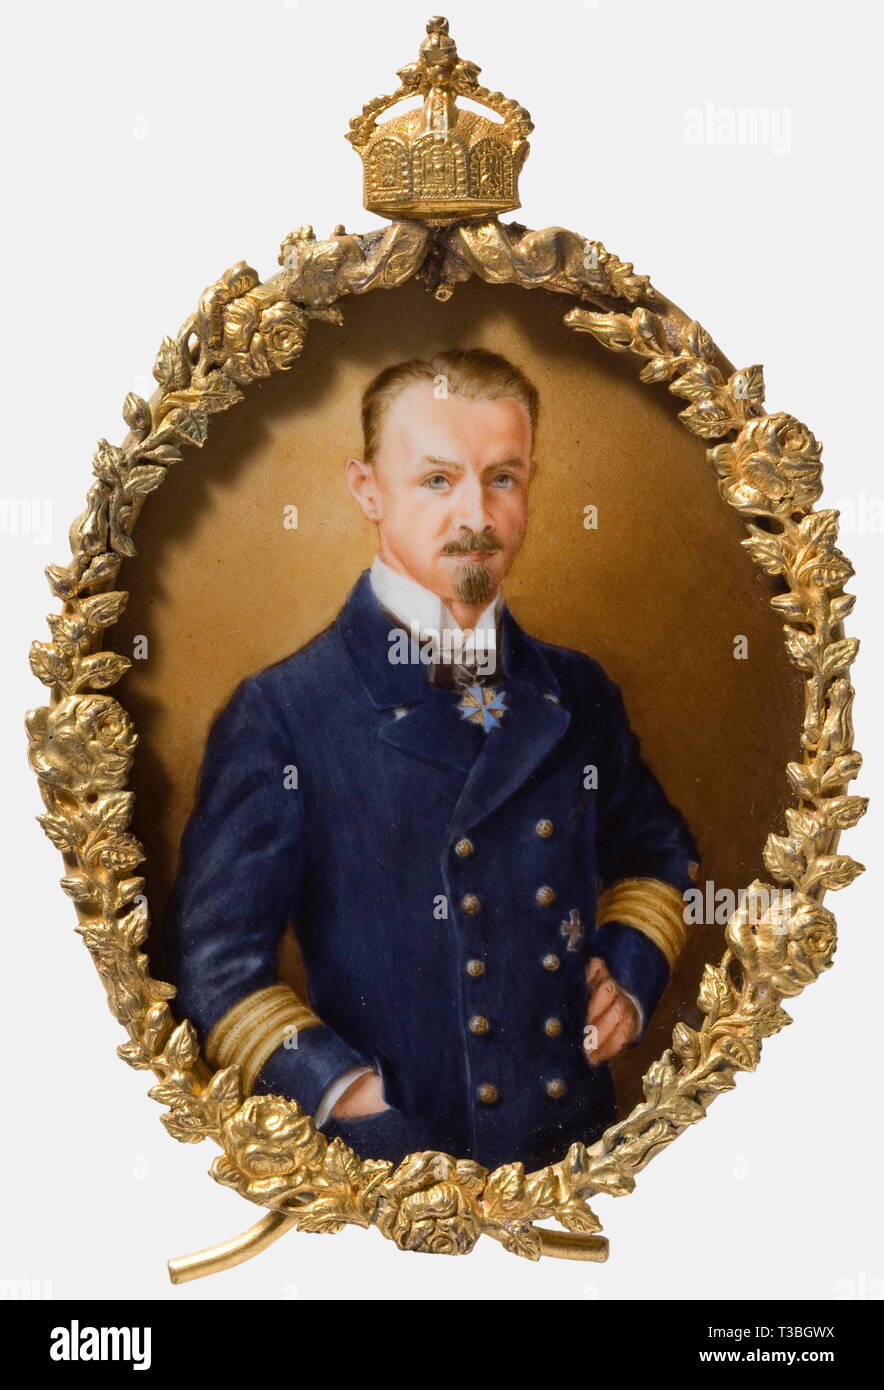 Frigate Captain Peter Strasser, a portrait miniature of the F.d.L. China painting. Strasser in full navy dress uniform, around his neck the Pour le mérite, the Iron Cross 1914 1st class on his chest. In oval gilt brass frame with rose garland border surmounted by an imperial crown, the back with stand. Size ca. 10.8 x 7.5 cm. people, 1910s, 20th century, troop, troops, armed forces, military, militaria, army, wing, group, air force, air forces, object, objects, stills, clipping, clippings, cut out, cut-out, cut-outs, painting, paintings, picture,, Additional-Rights-Clearance-Info-Not-Available Stock Photo